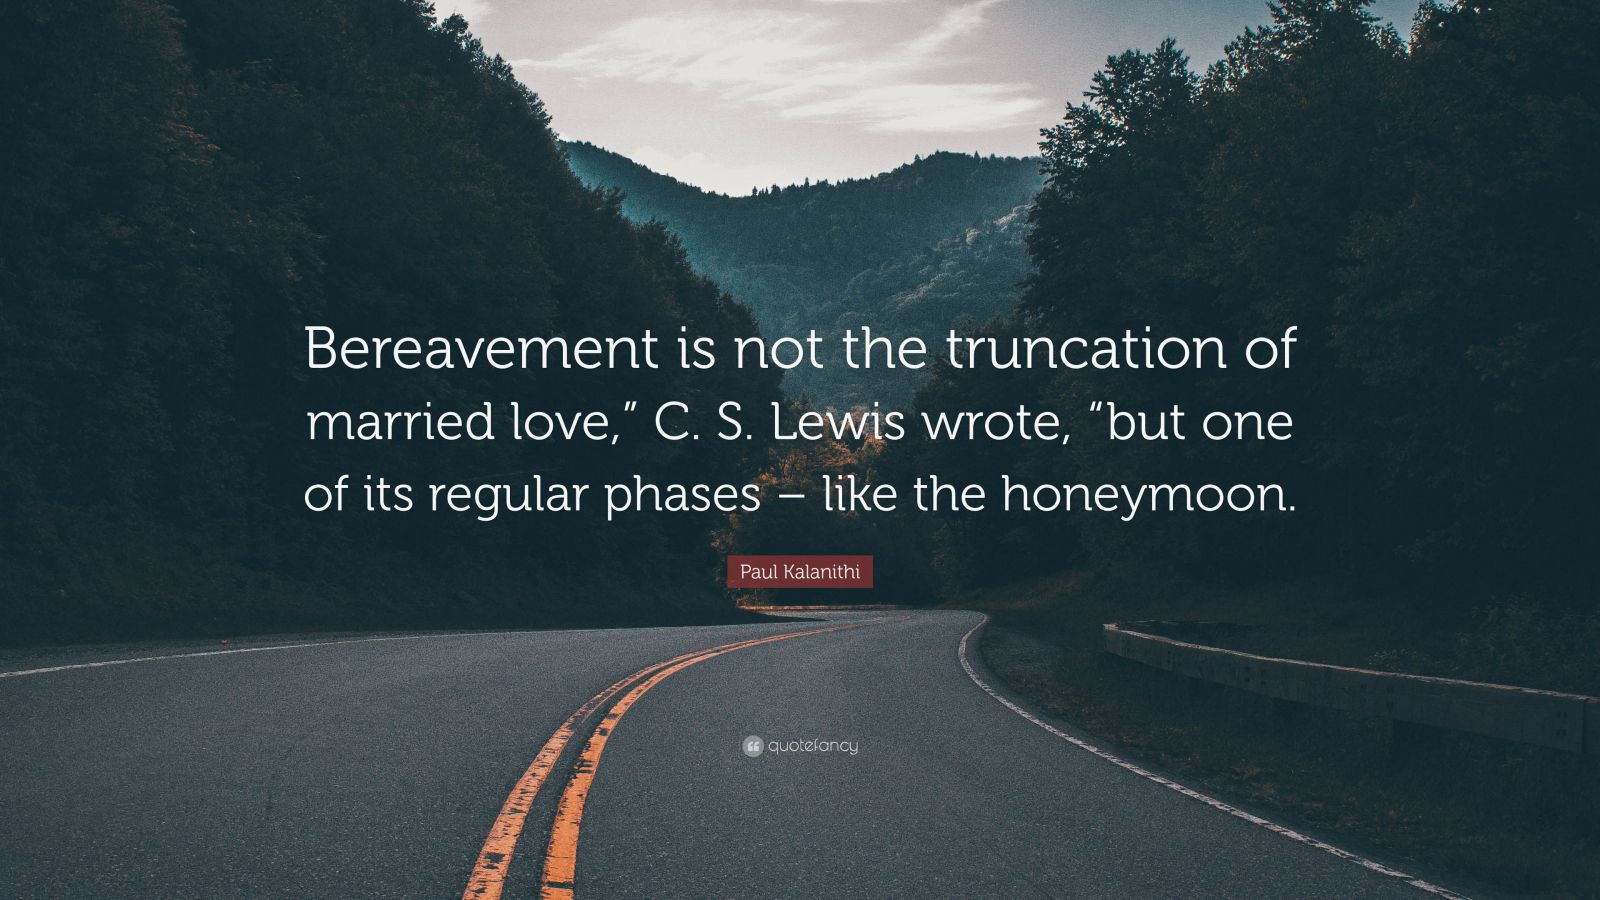 Paul Kalanithi Quote: “Bereavement is not the truncation of married